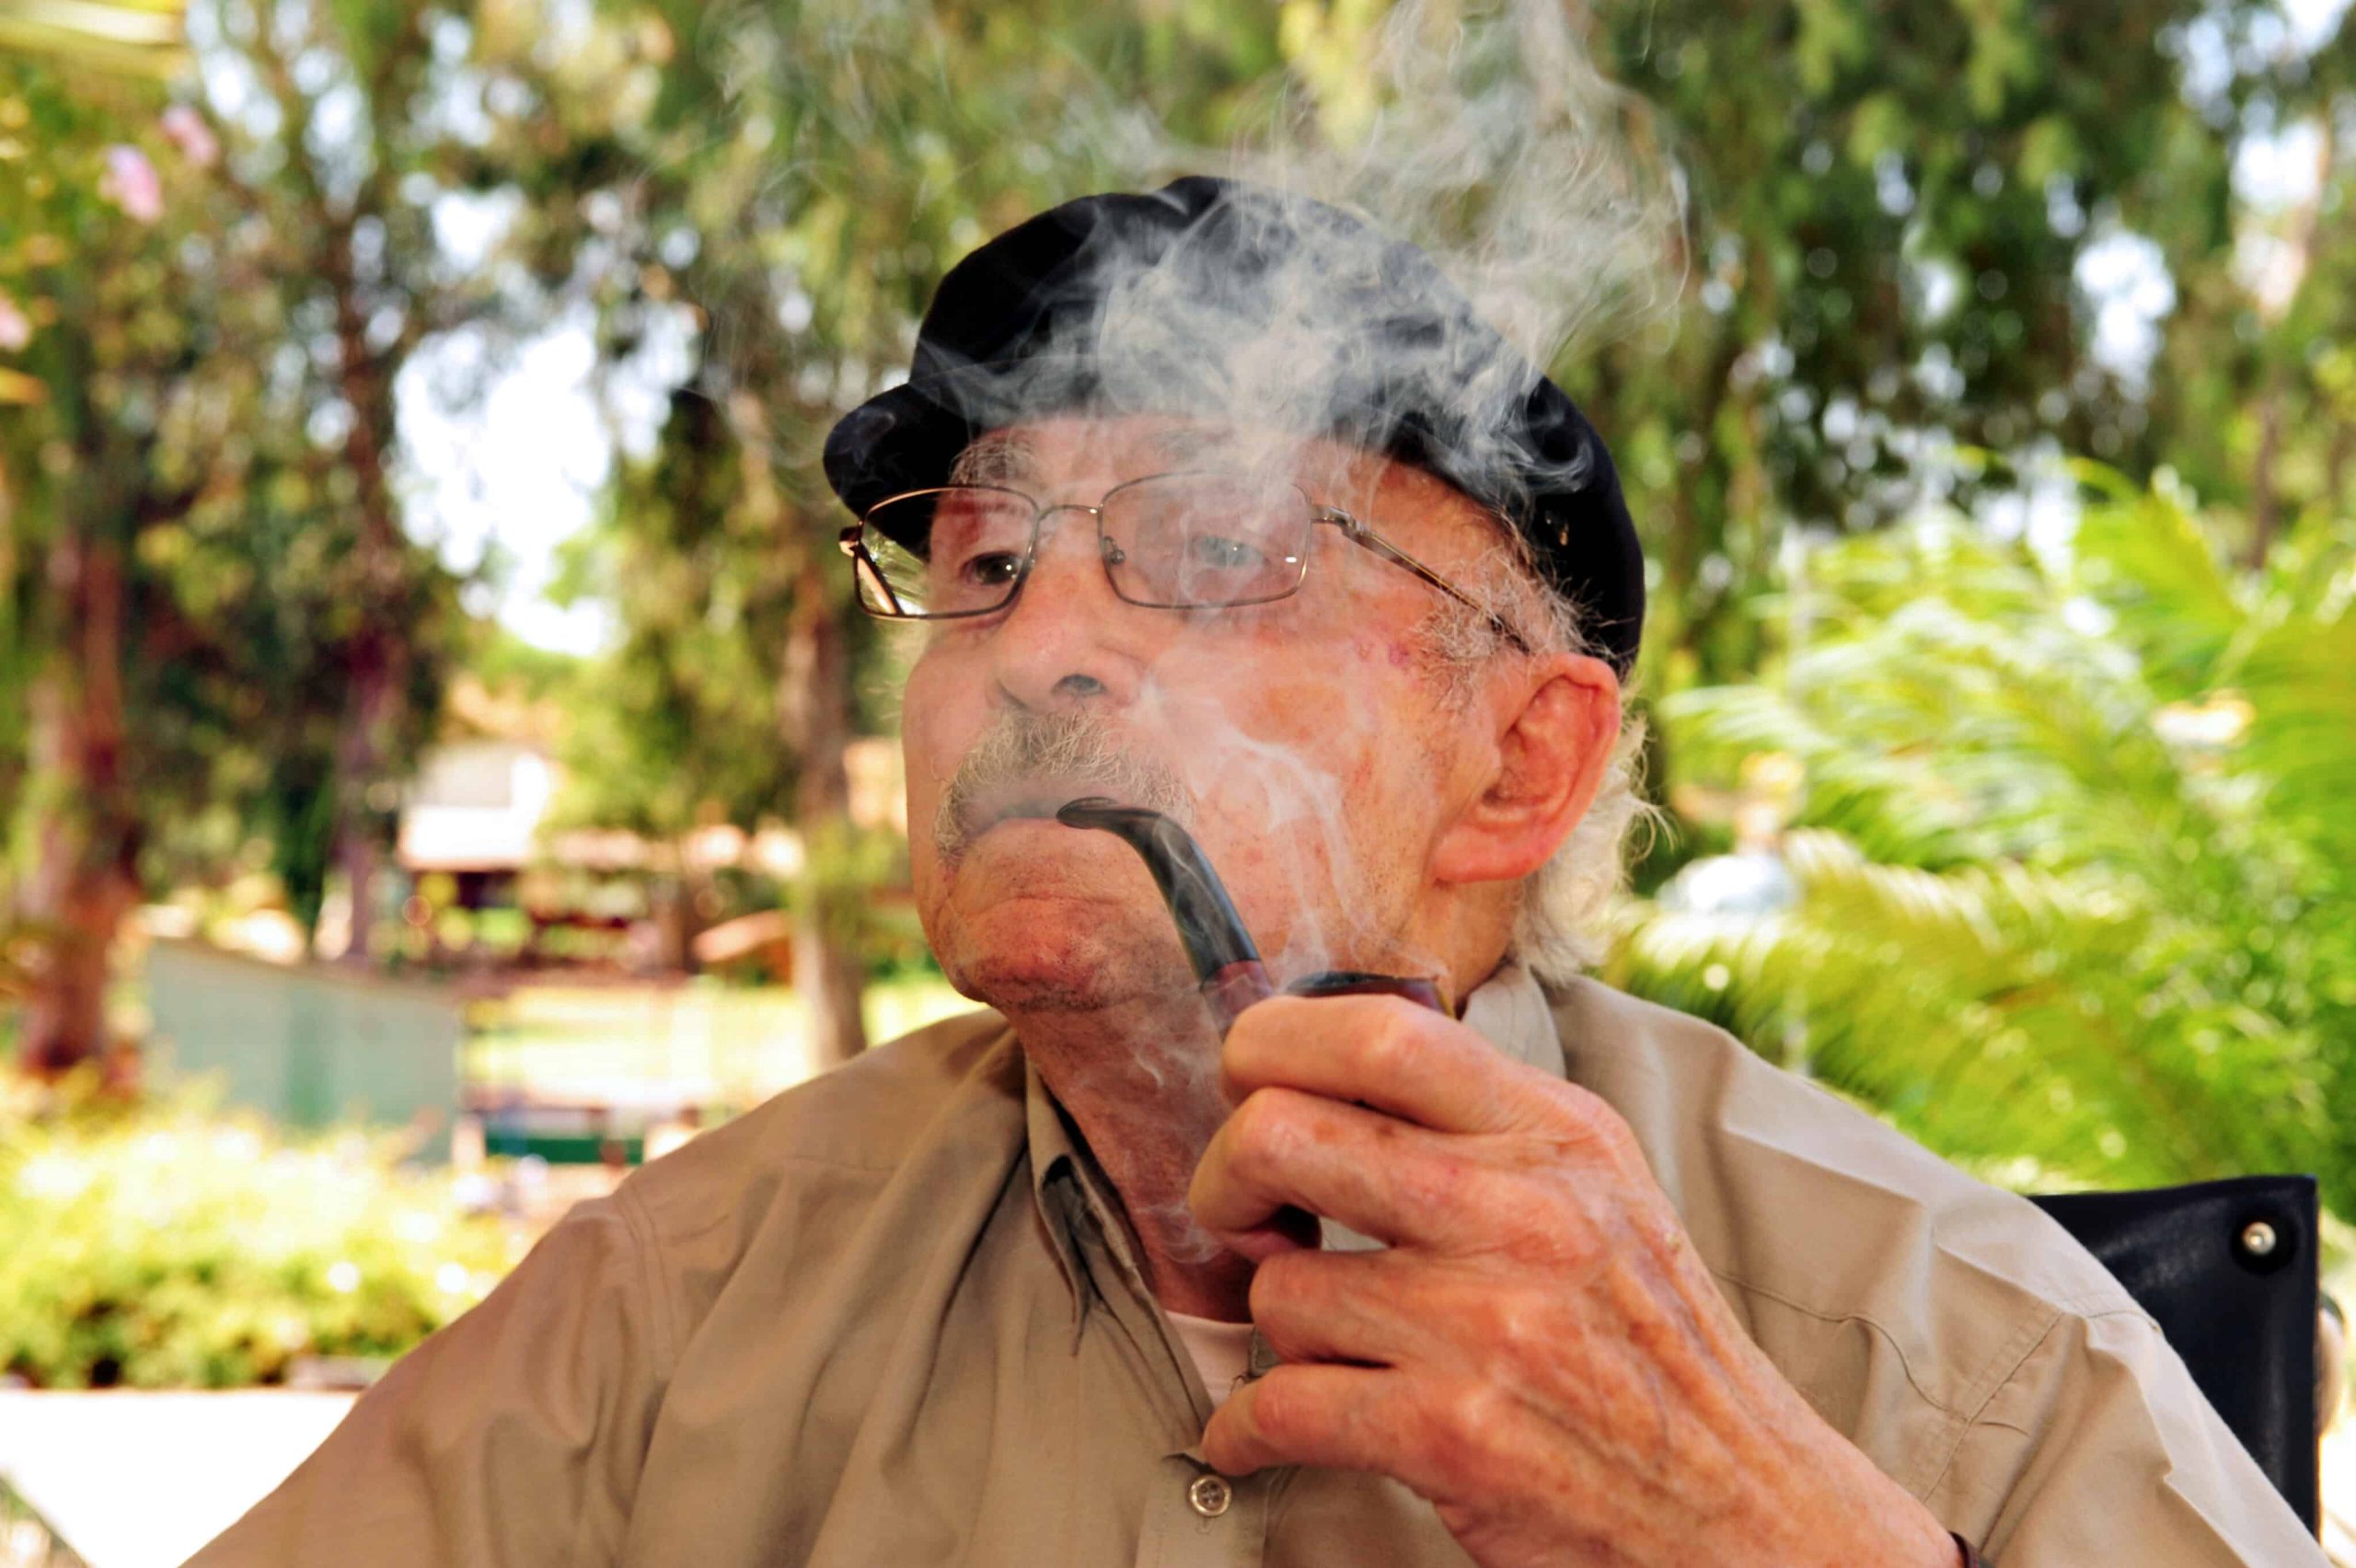 Study: Occasional MJ Use Among Older Adults With HIV Linked to Better Cognition